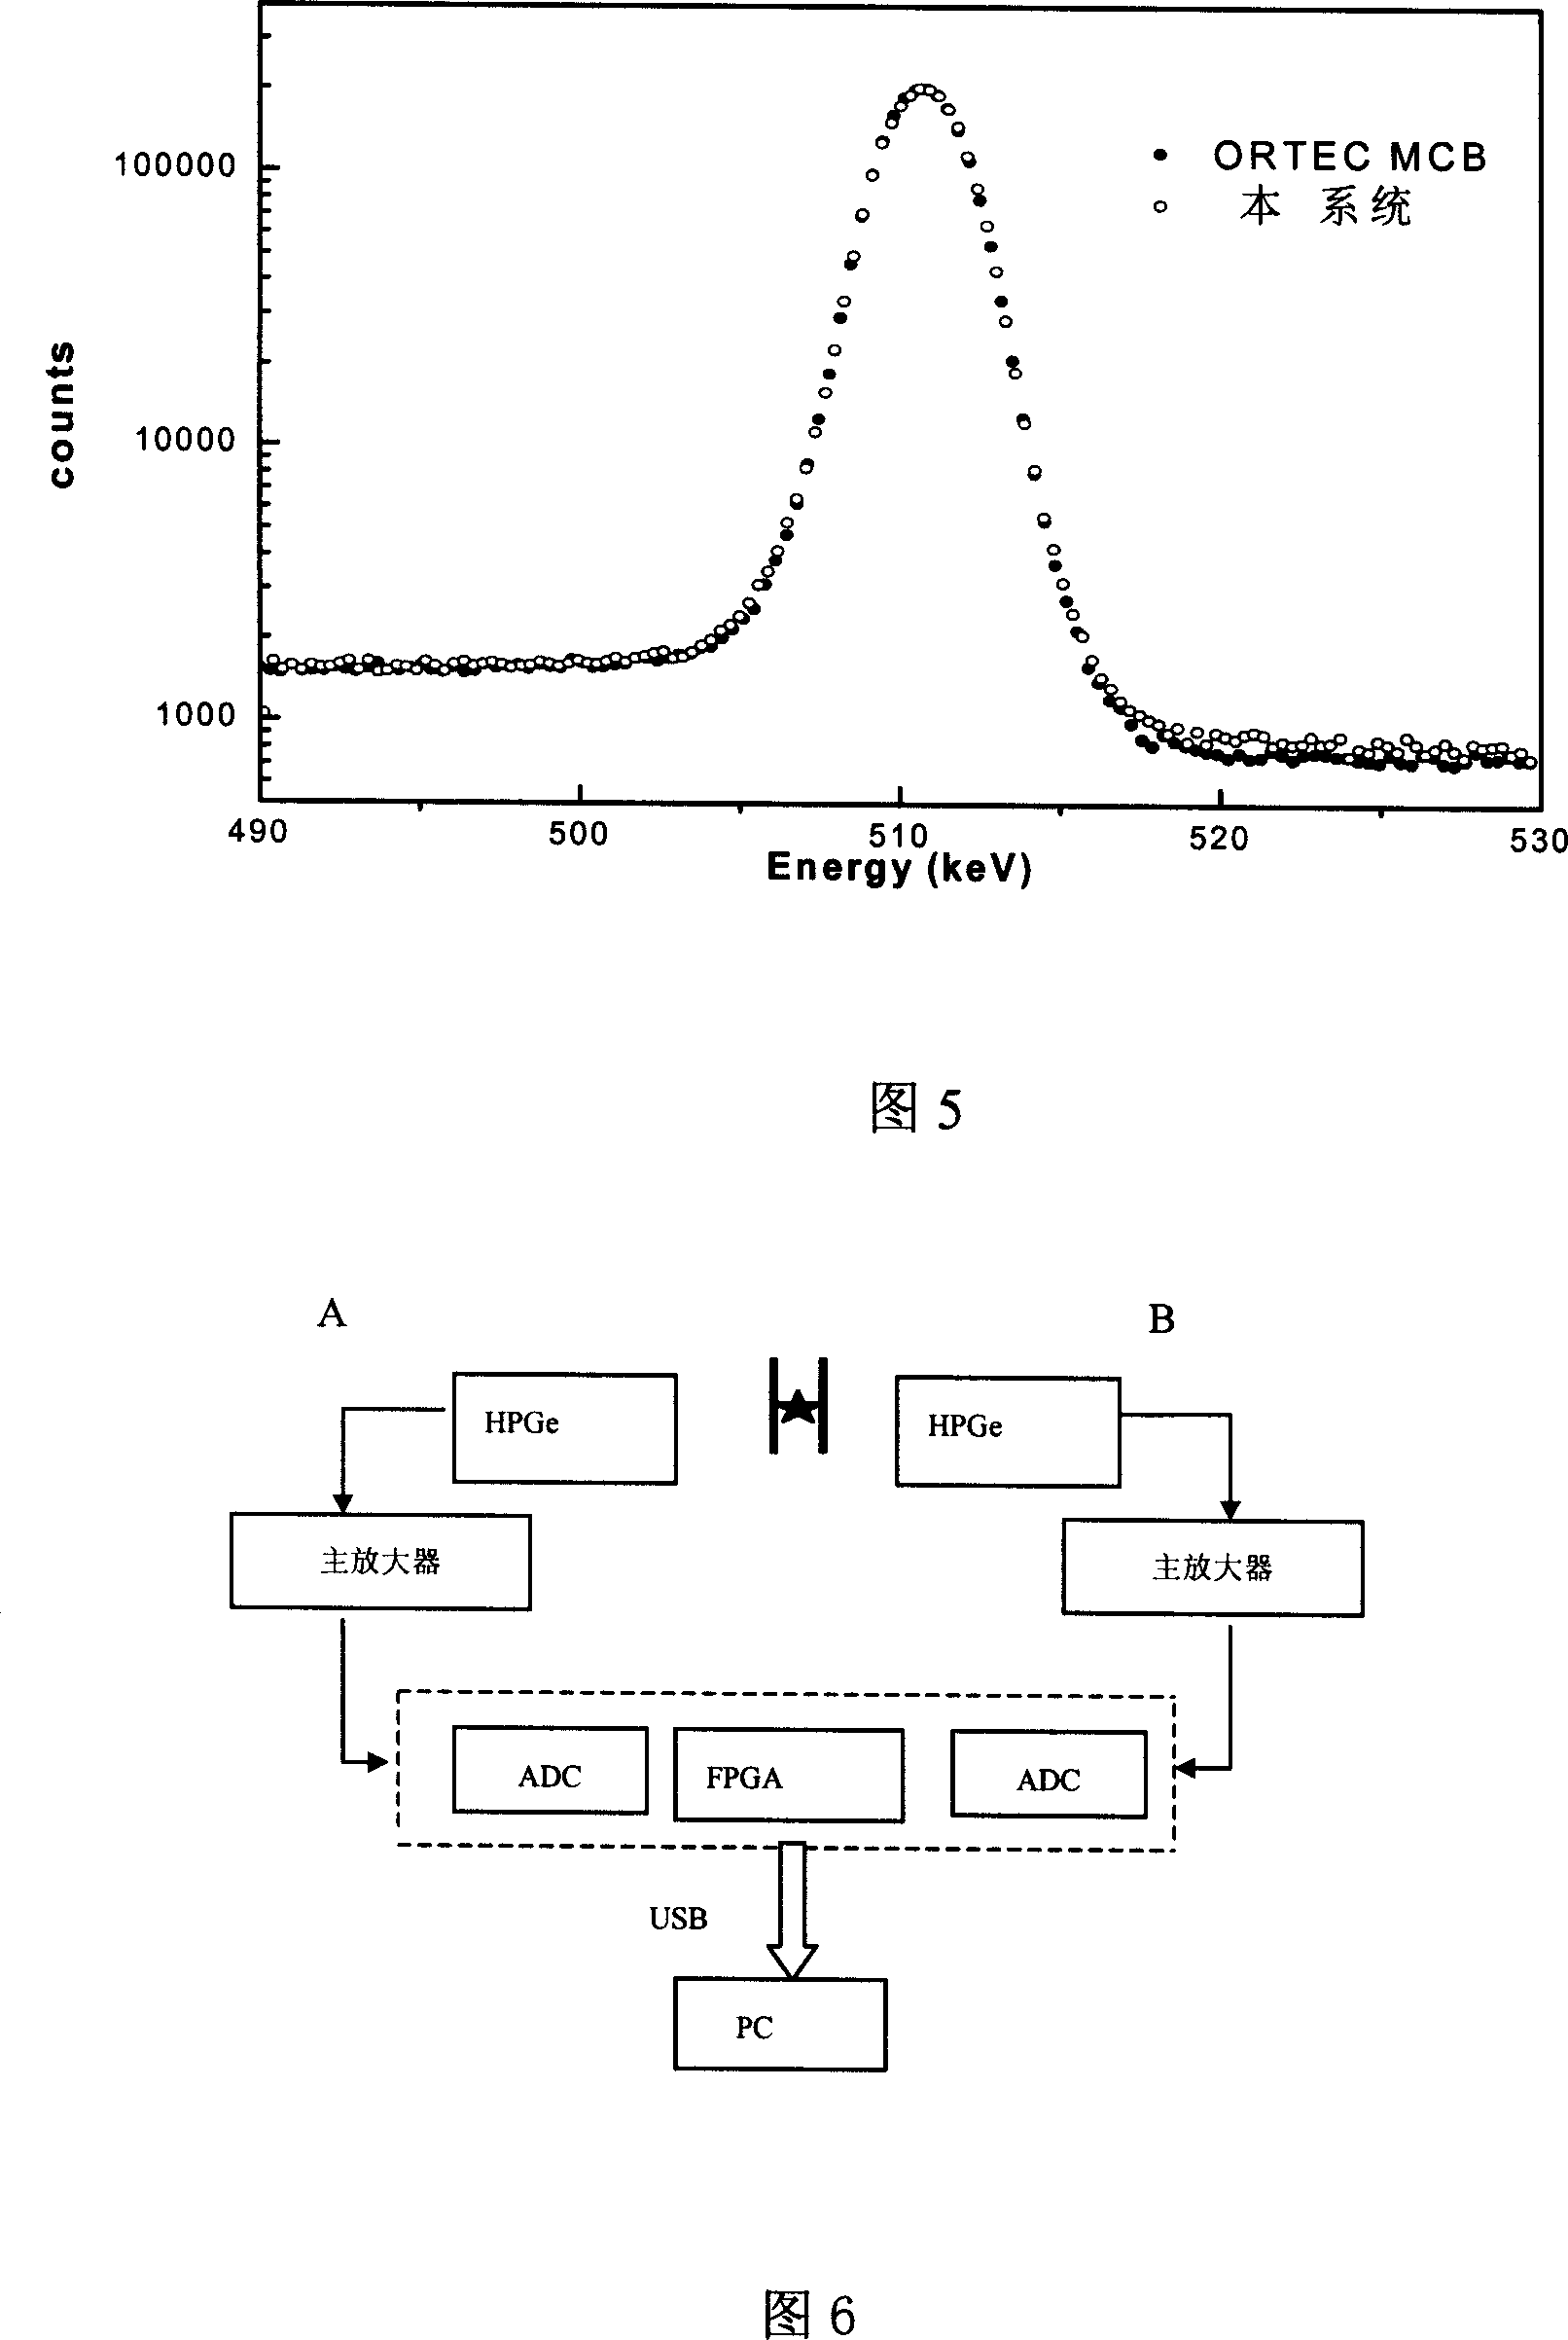 High-speed parallel multi-path multi-path-data system for mulclear spectroscope and nuclear electronics